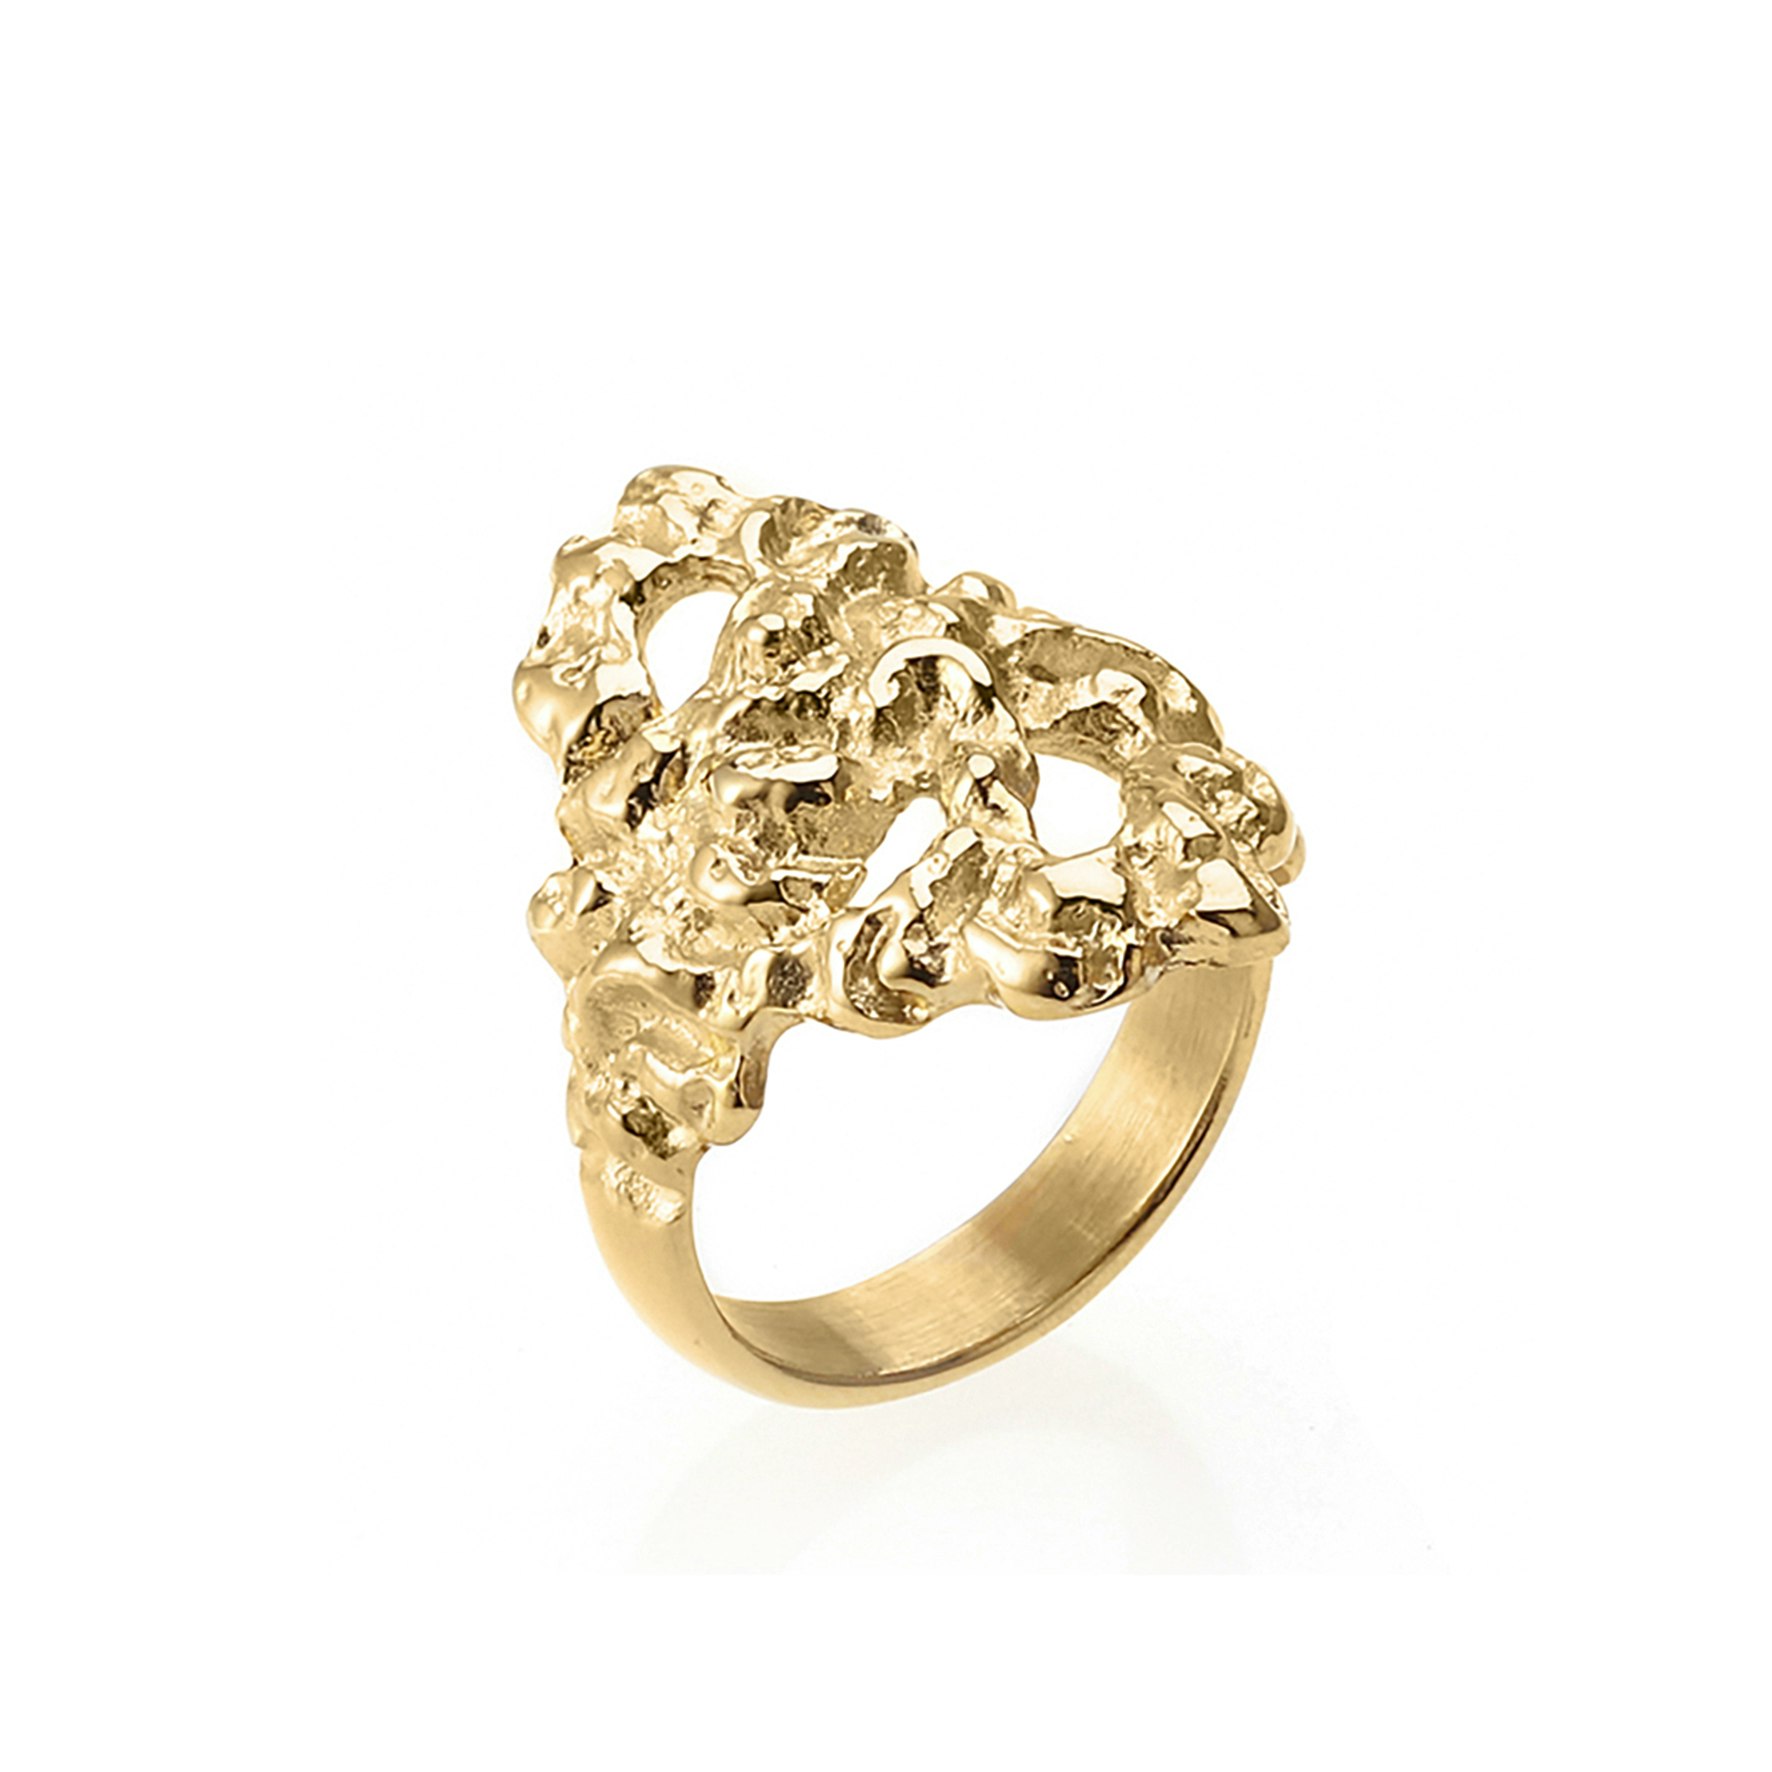 Xenia x Sistie 2nd Medium Ring from Sistie 2nd in Goldplated stainless steel